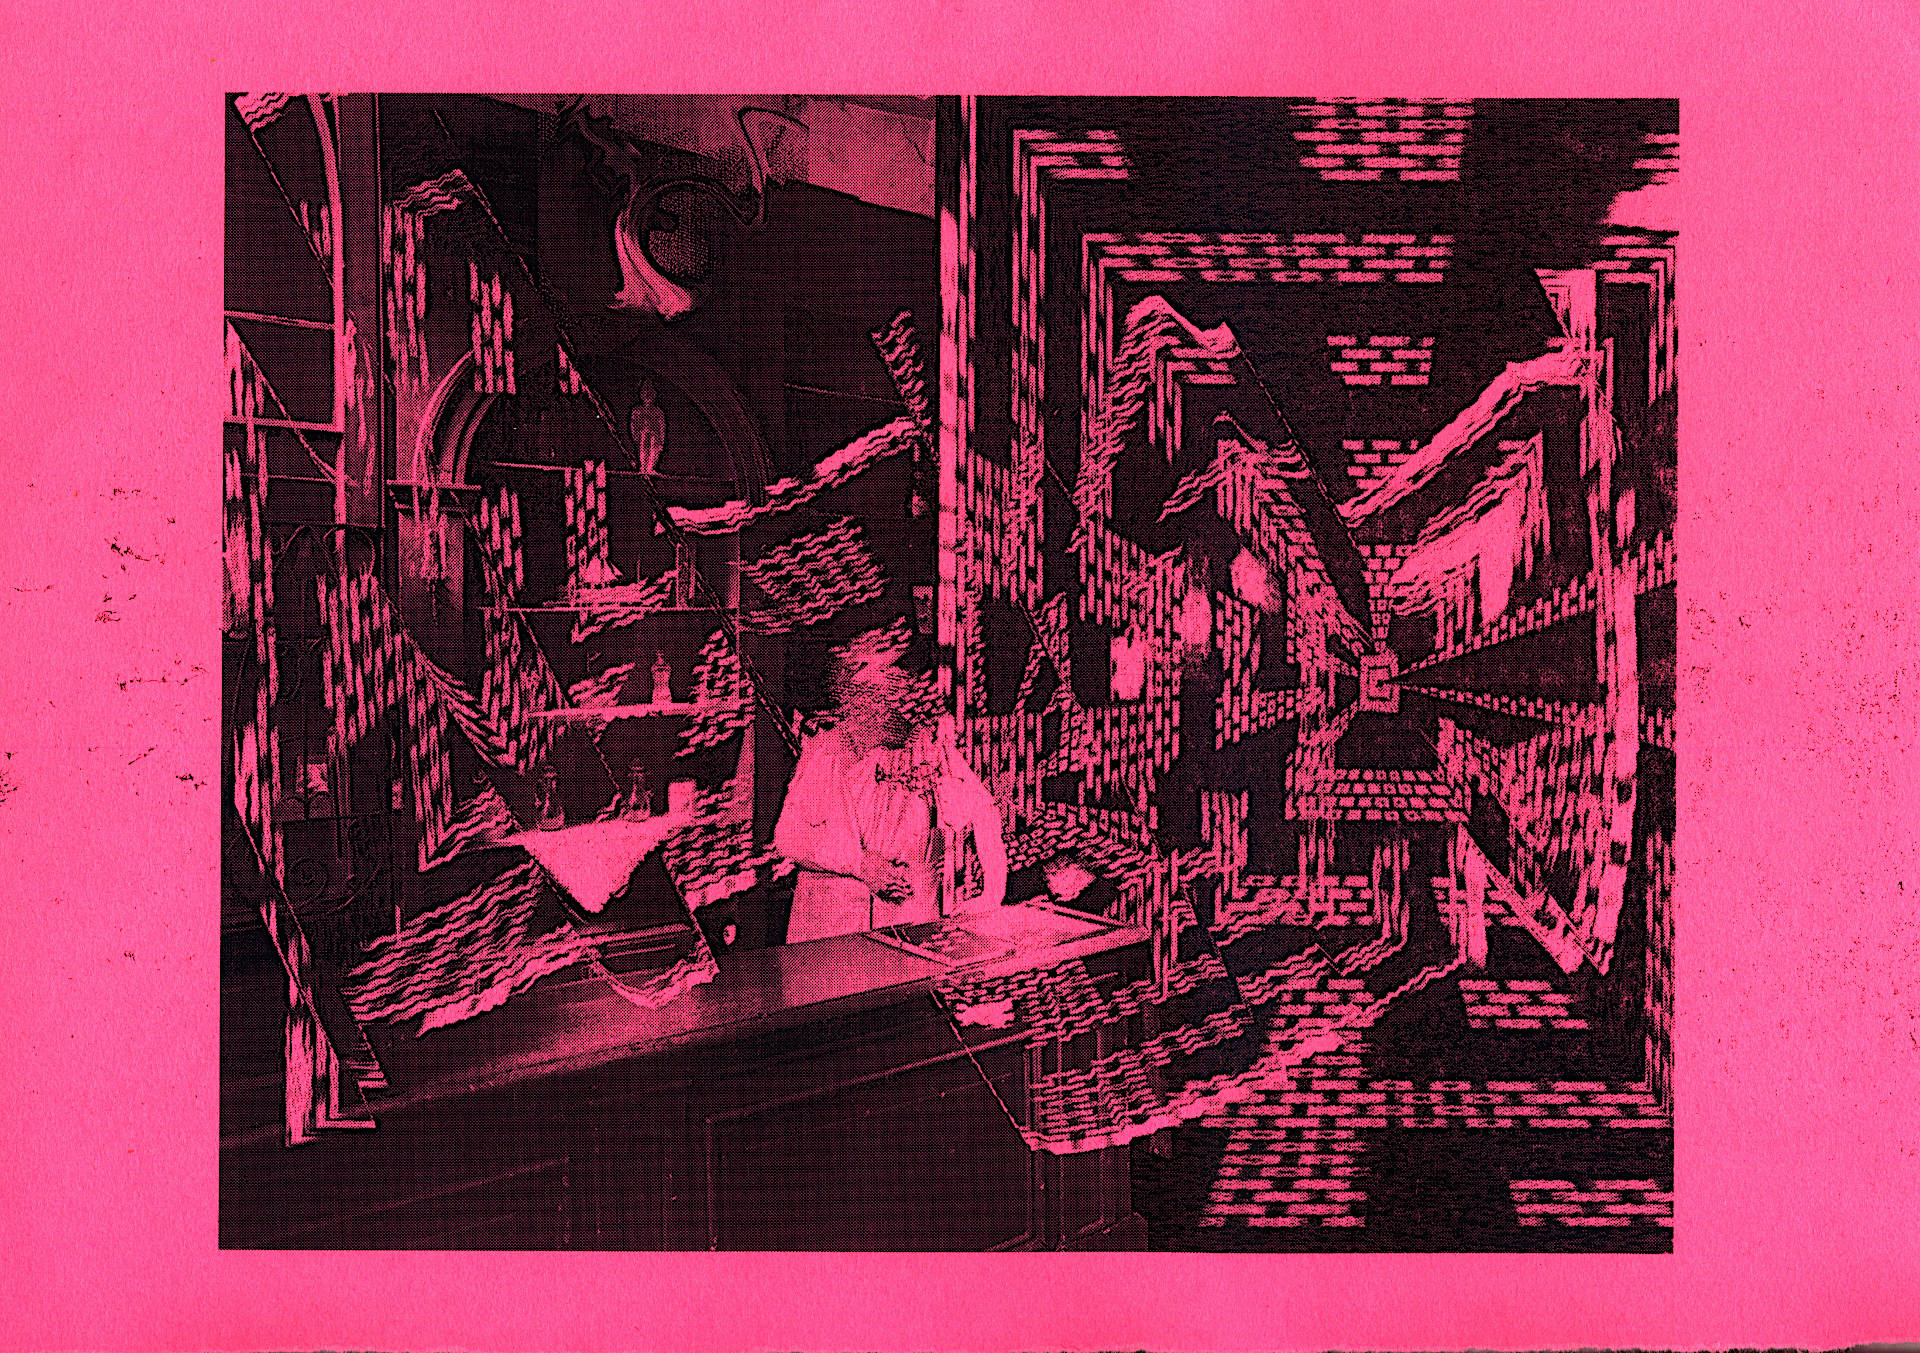 black laser print on pink neon paper. A waiter stands behind an old wooden counter in a coffeehouse. A labyrinth world from a cyber game is next to the person and also overlaying the image.